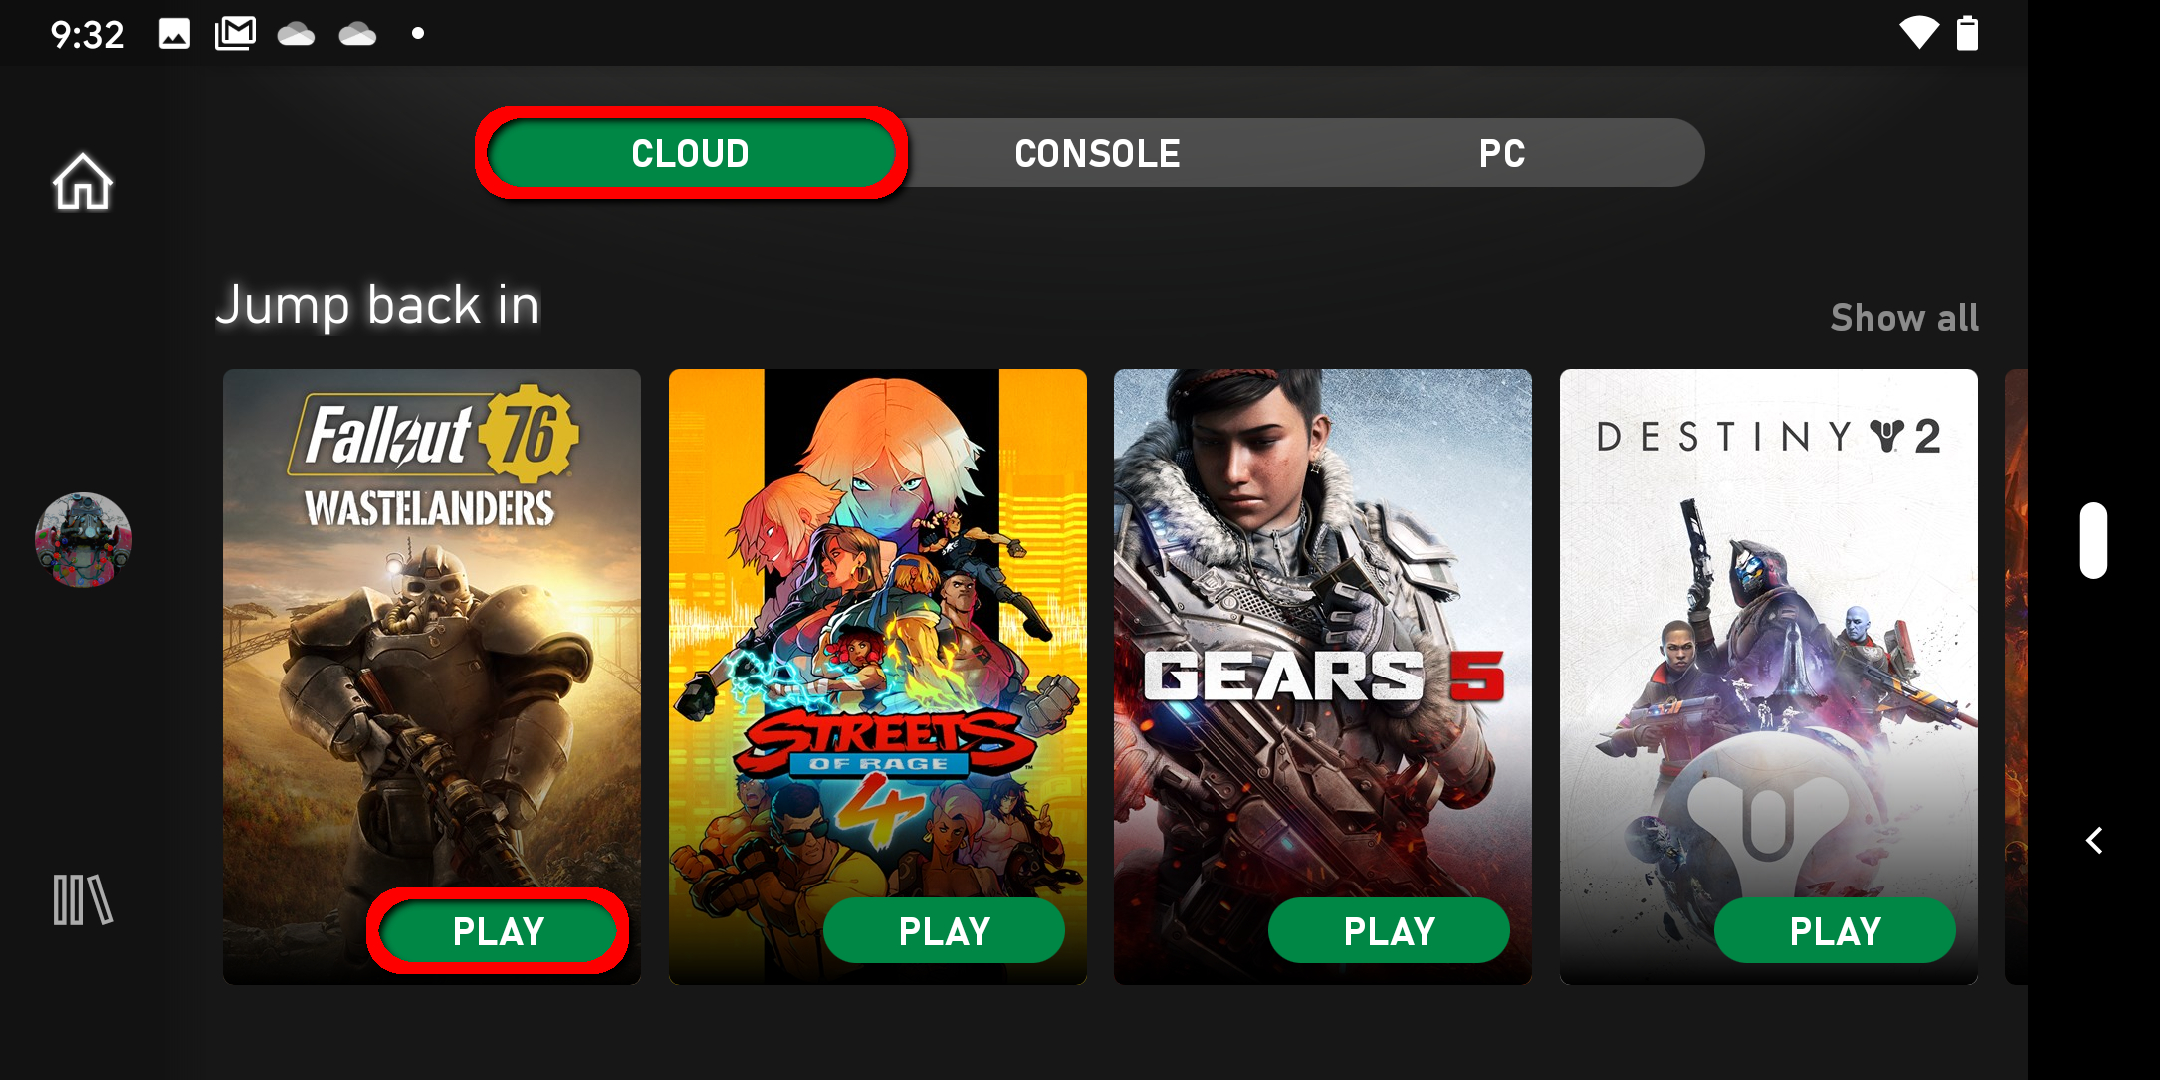 Xbox One and Series X/S can now stream games with Xbox Cloud Gaming